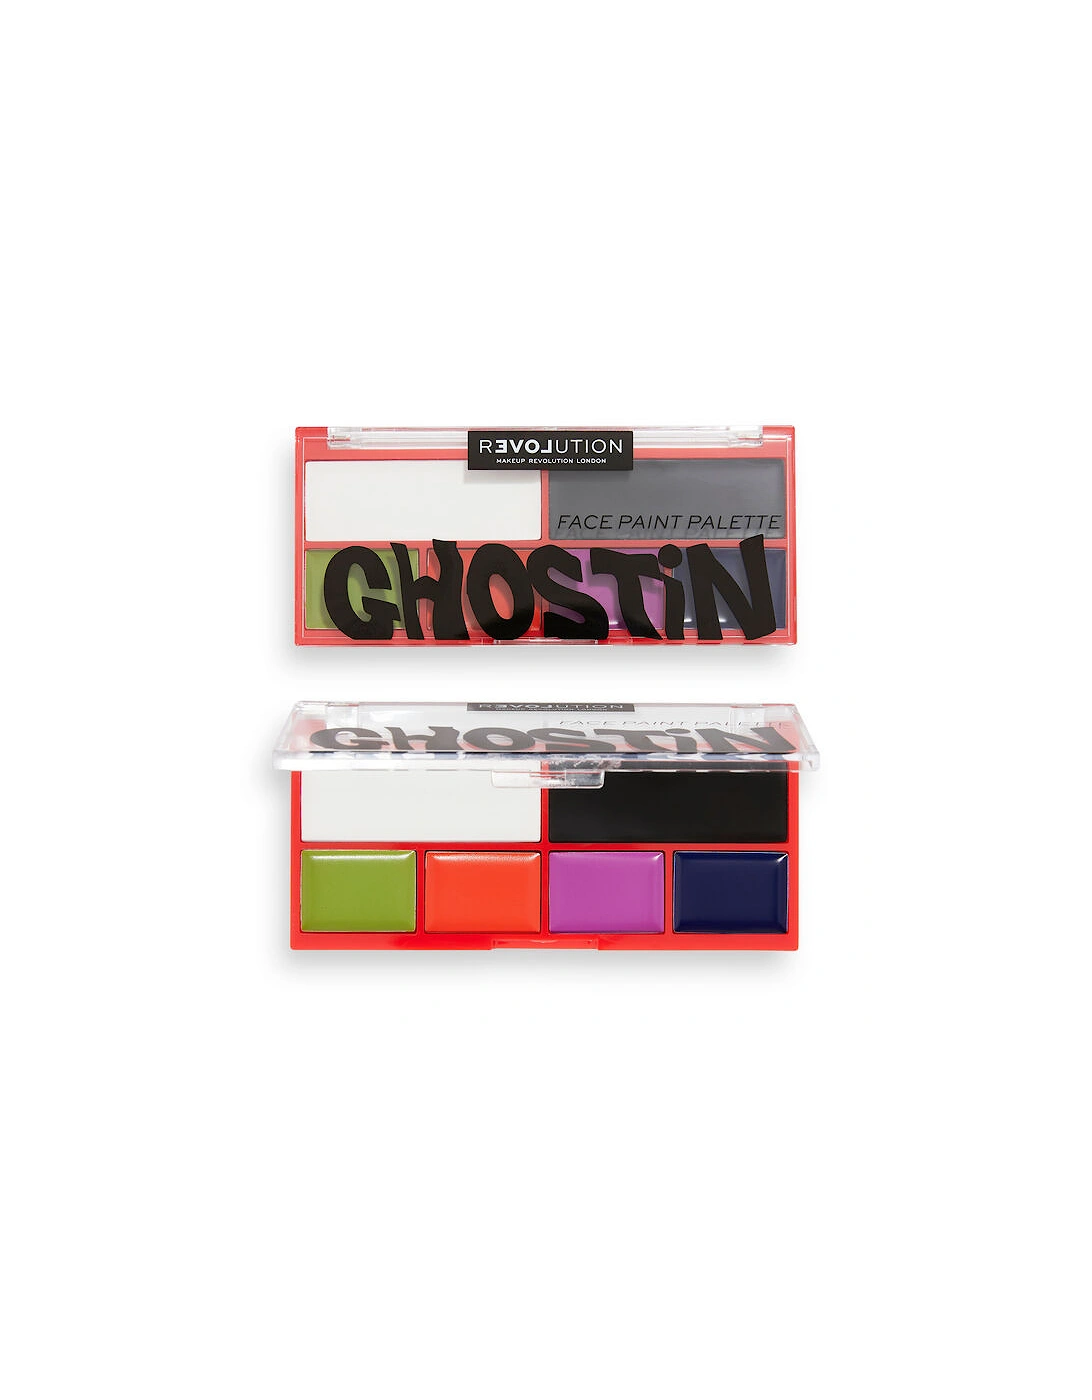 Relove by Ghostin Face Paint Palette, 2 of 1